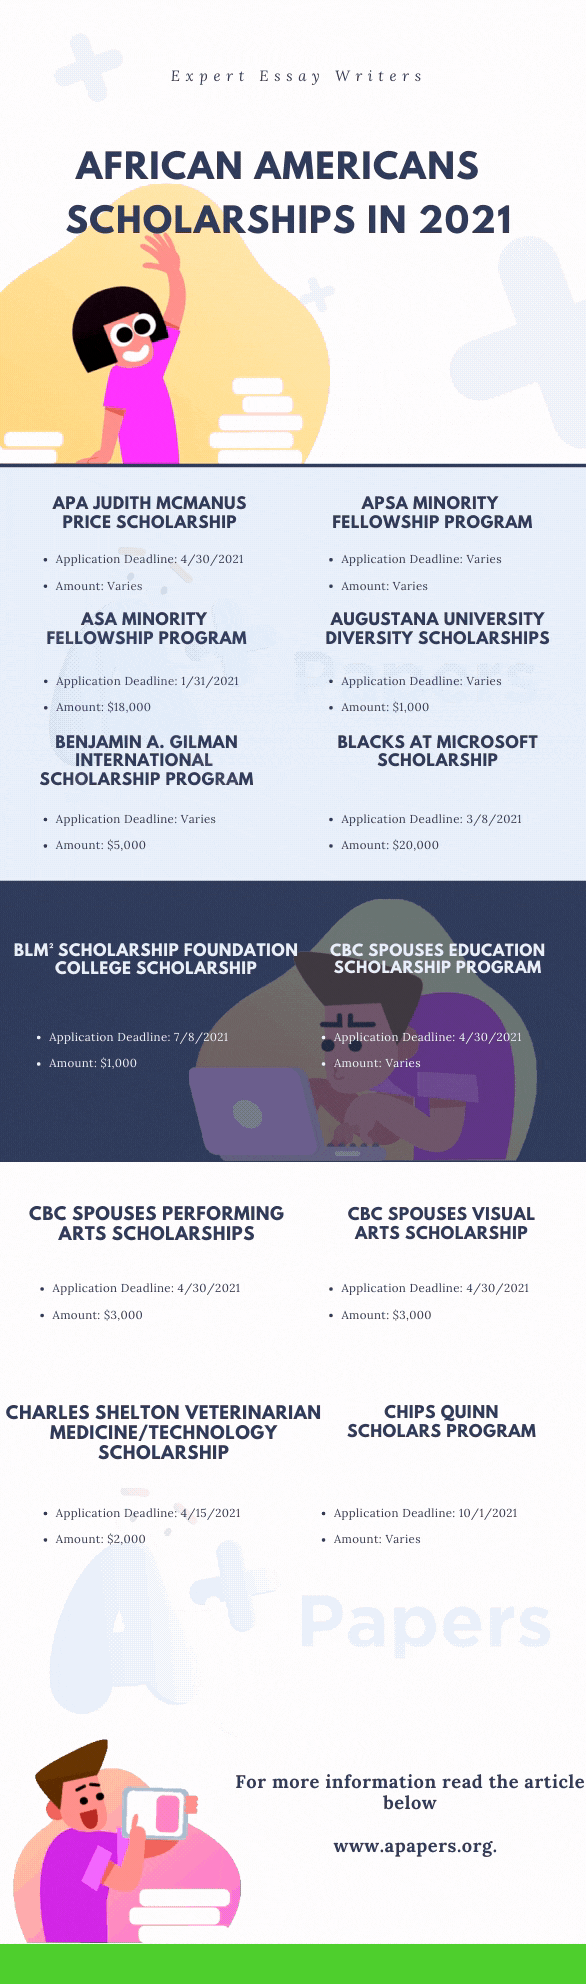 Scholarships Available for African Americans in 2021